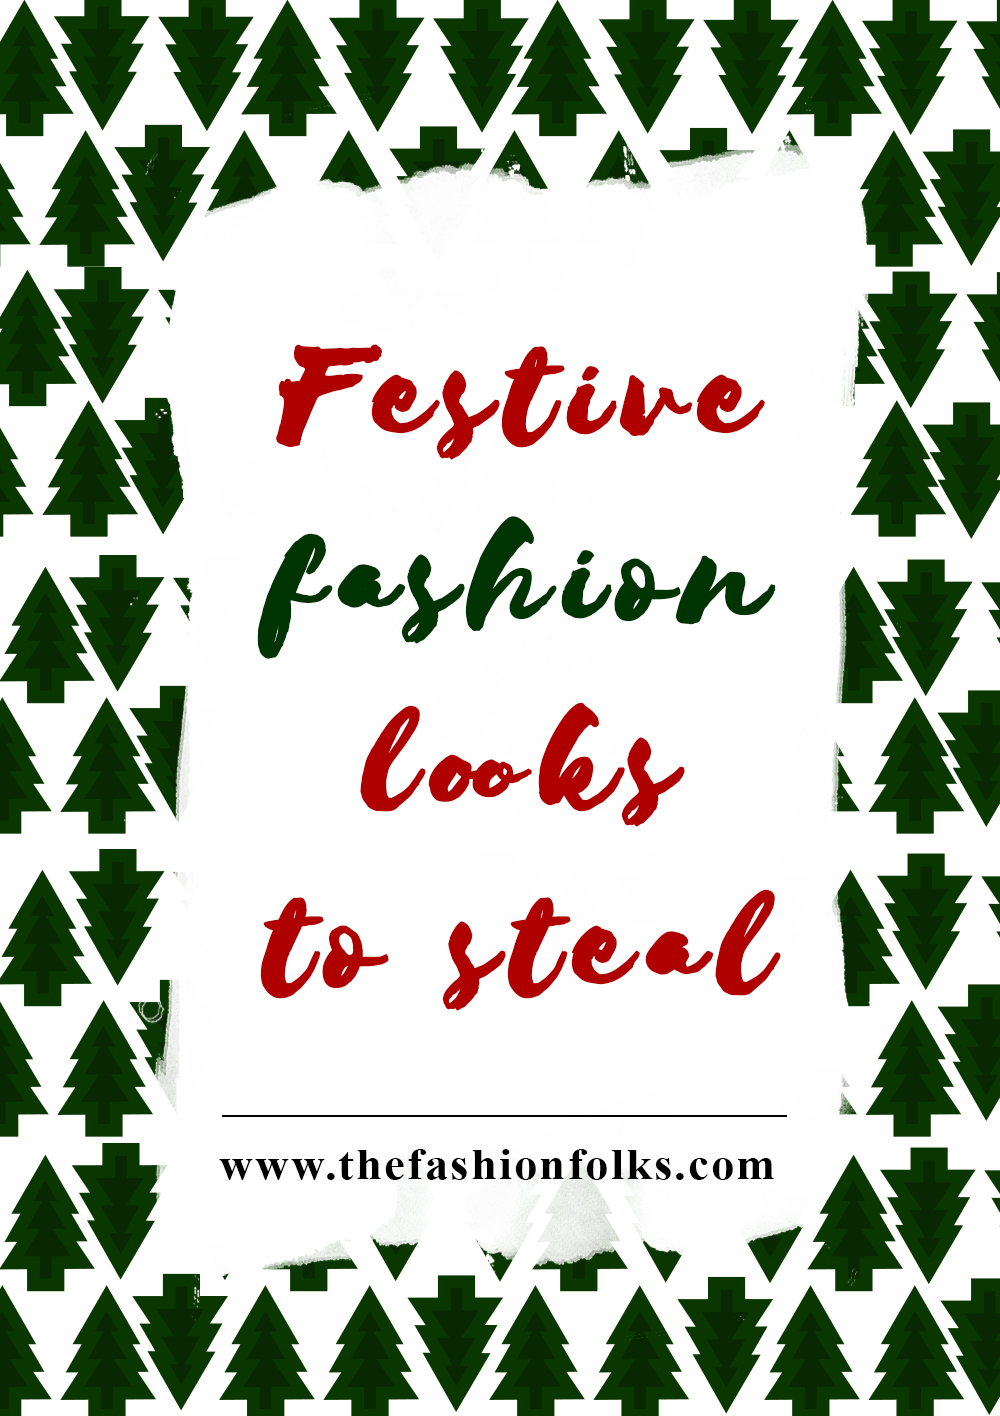 Festive Fashion Looks To Steal + Fashion Street Style Outfit Inspiration | The Fashion Folks